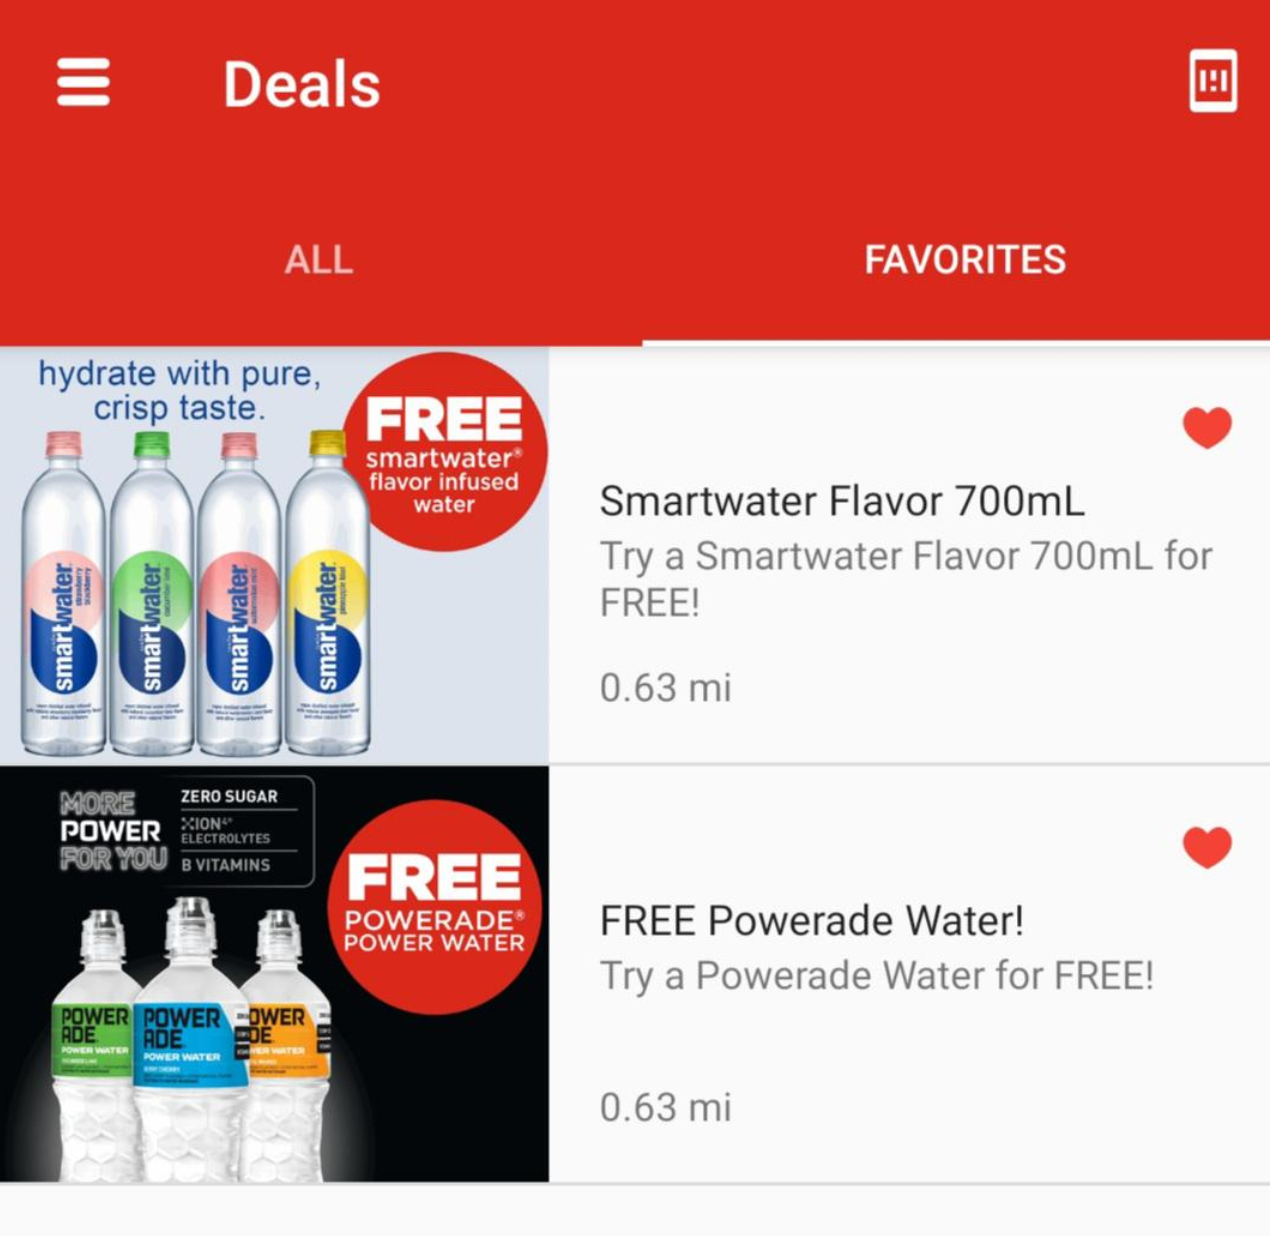 circle-k-free-smartwater-and-powerade-water-offers